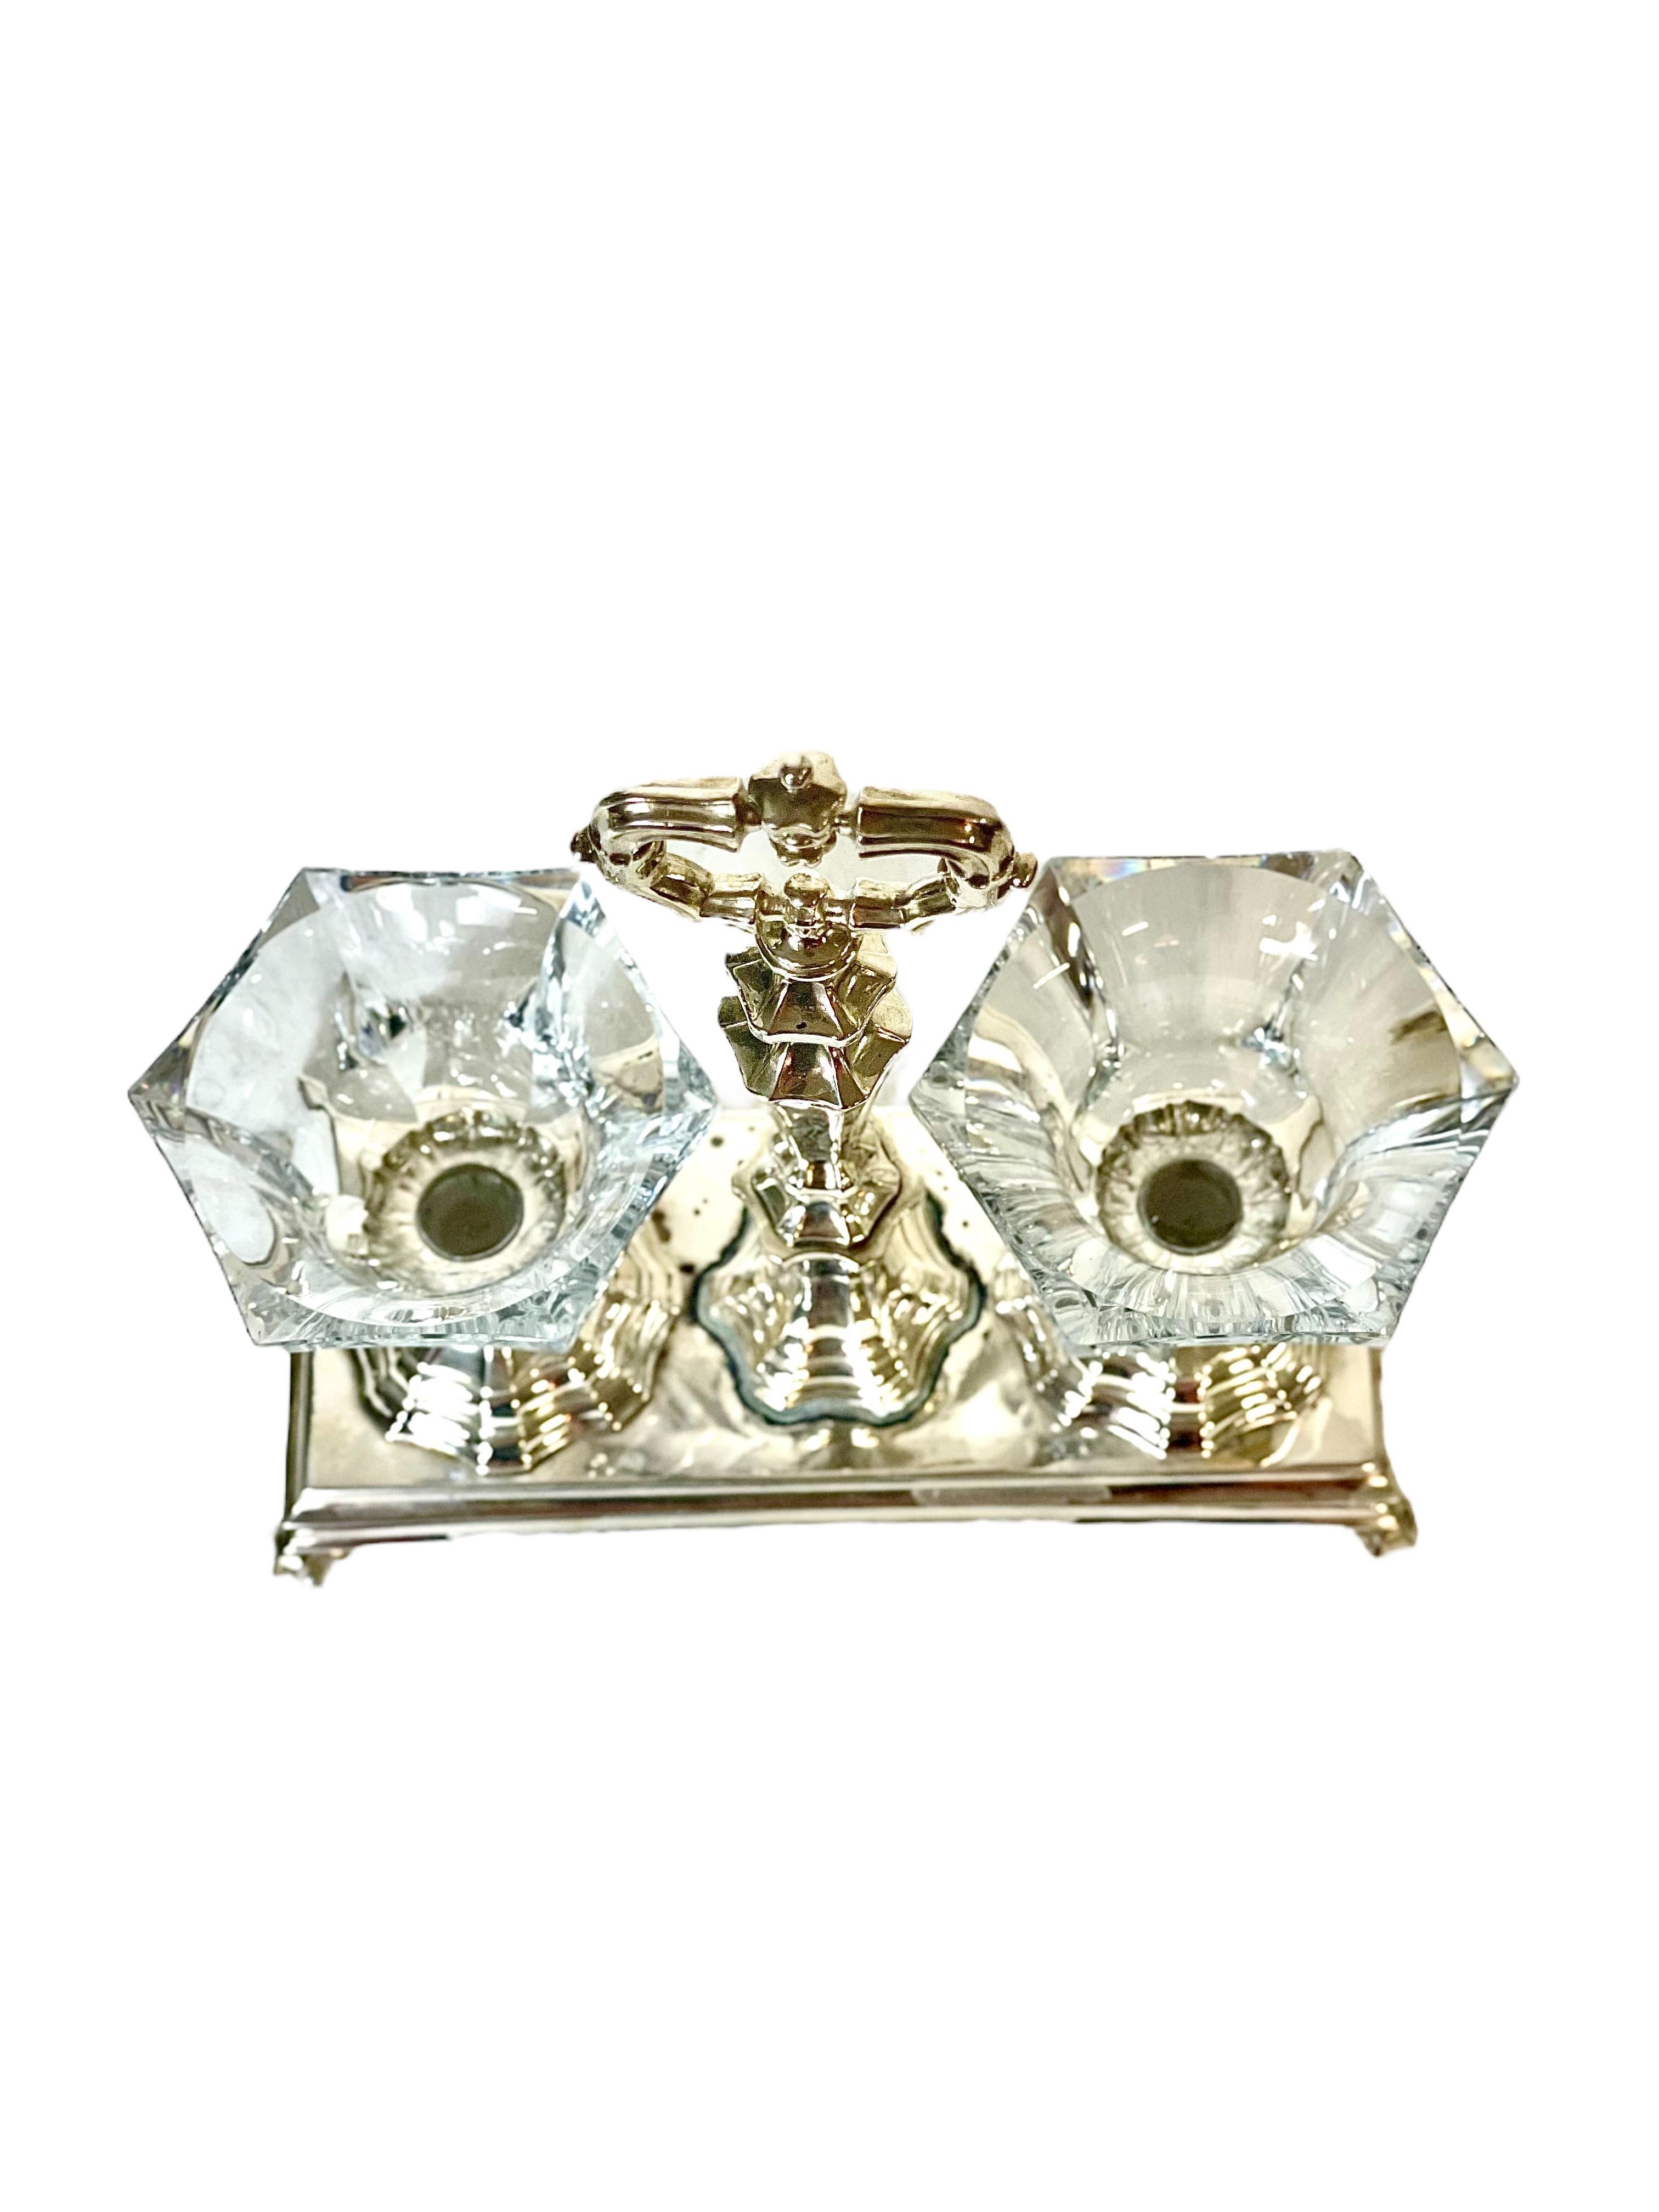 French Double Salt Cellar in Crystal and Sterling Silver